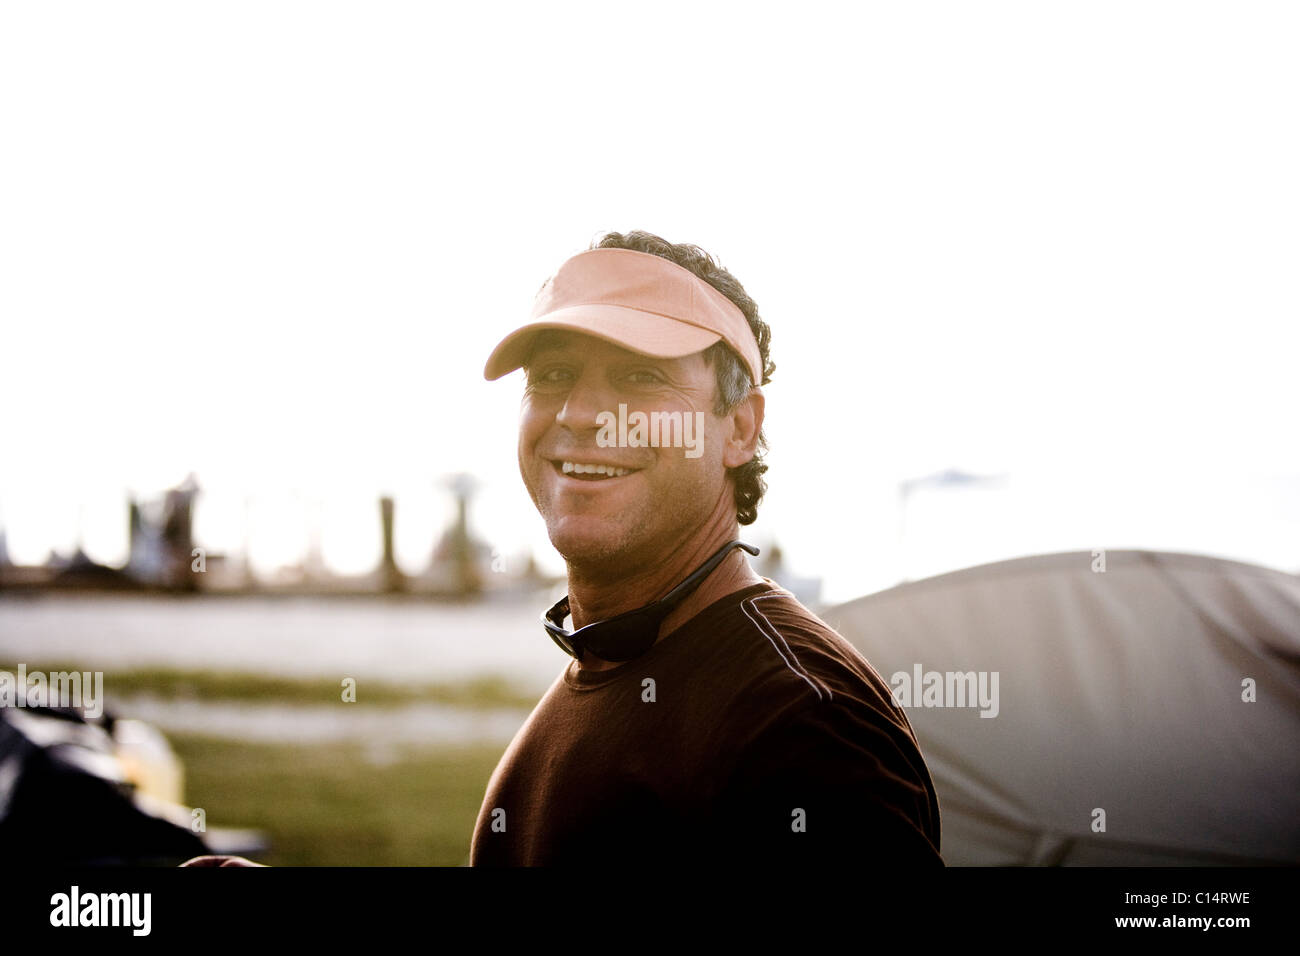 A man in an orange visor with sunglasses softly smiles at the camera. Stock Photo